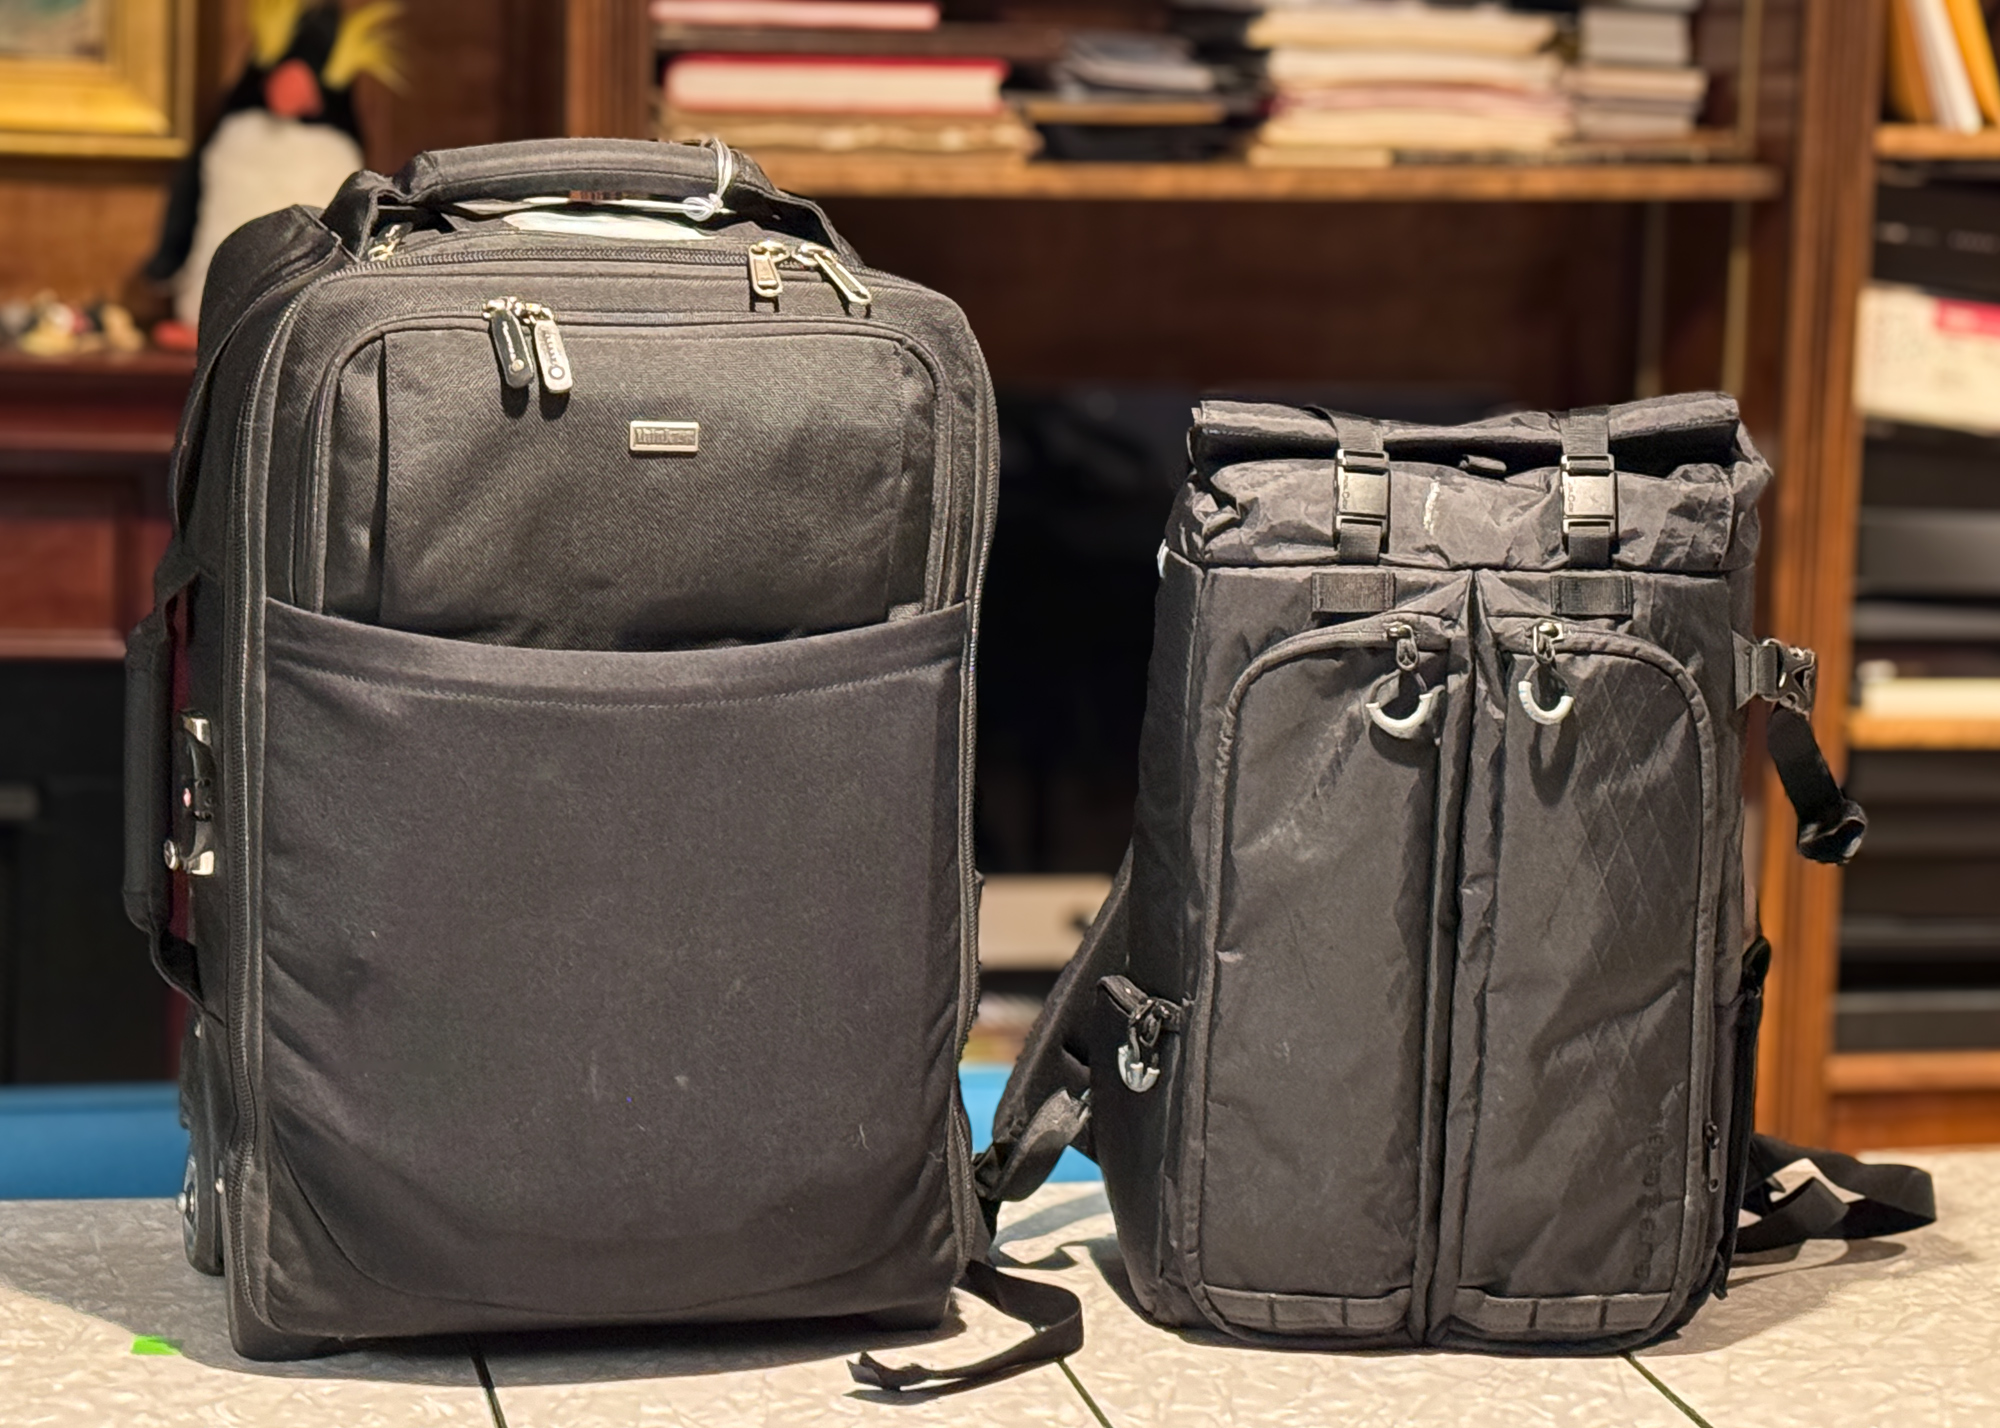 The two bags carry all my gear